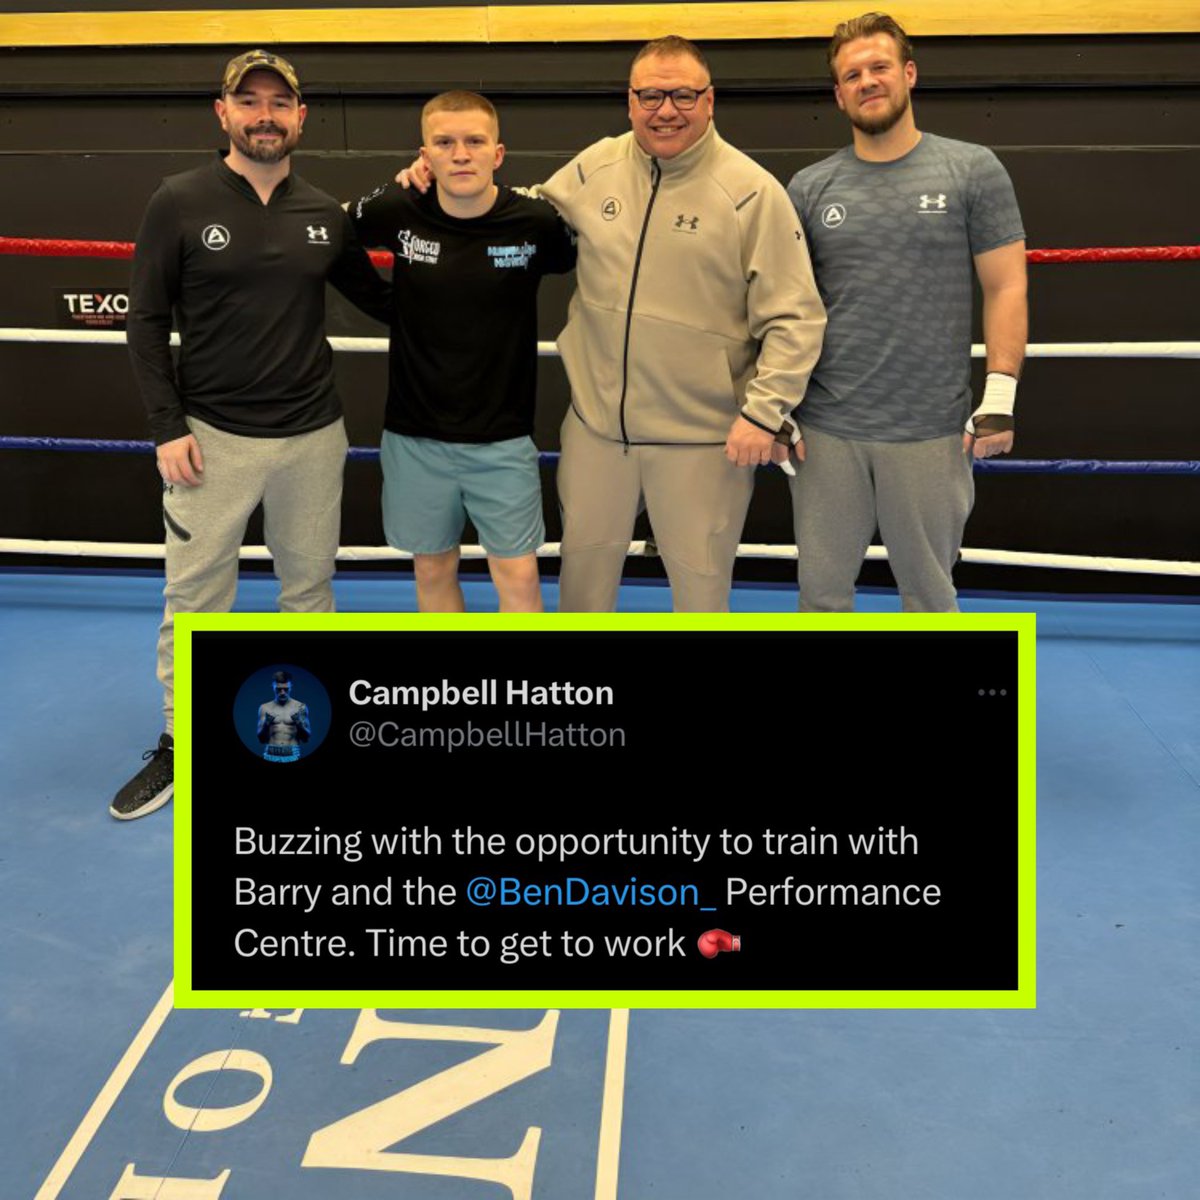 Campbell Hatton has confirmed that Ben Davidson is his new trainer. #fightclub247 #boxing #fighter #champion #forthefans